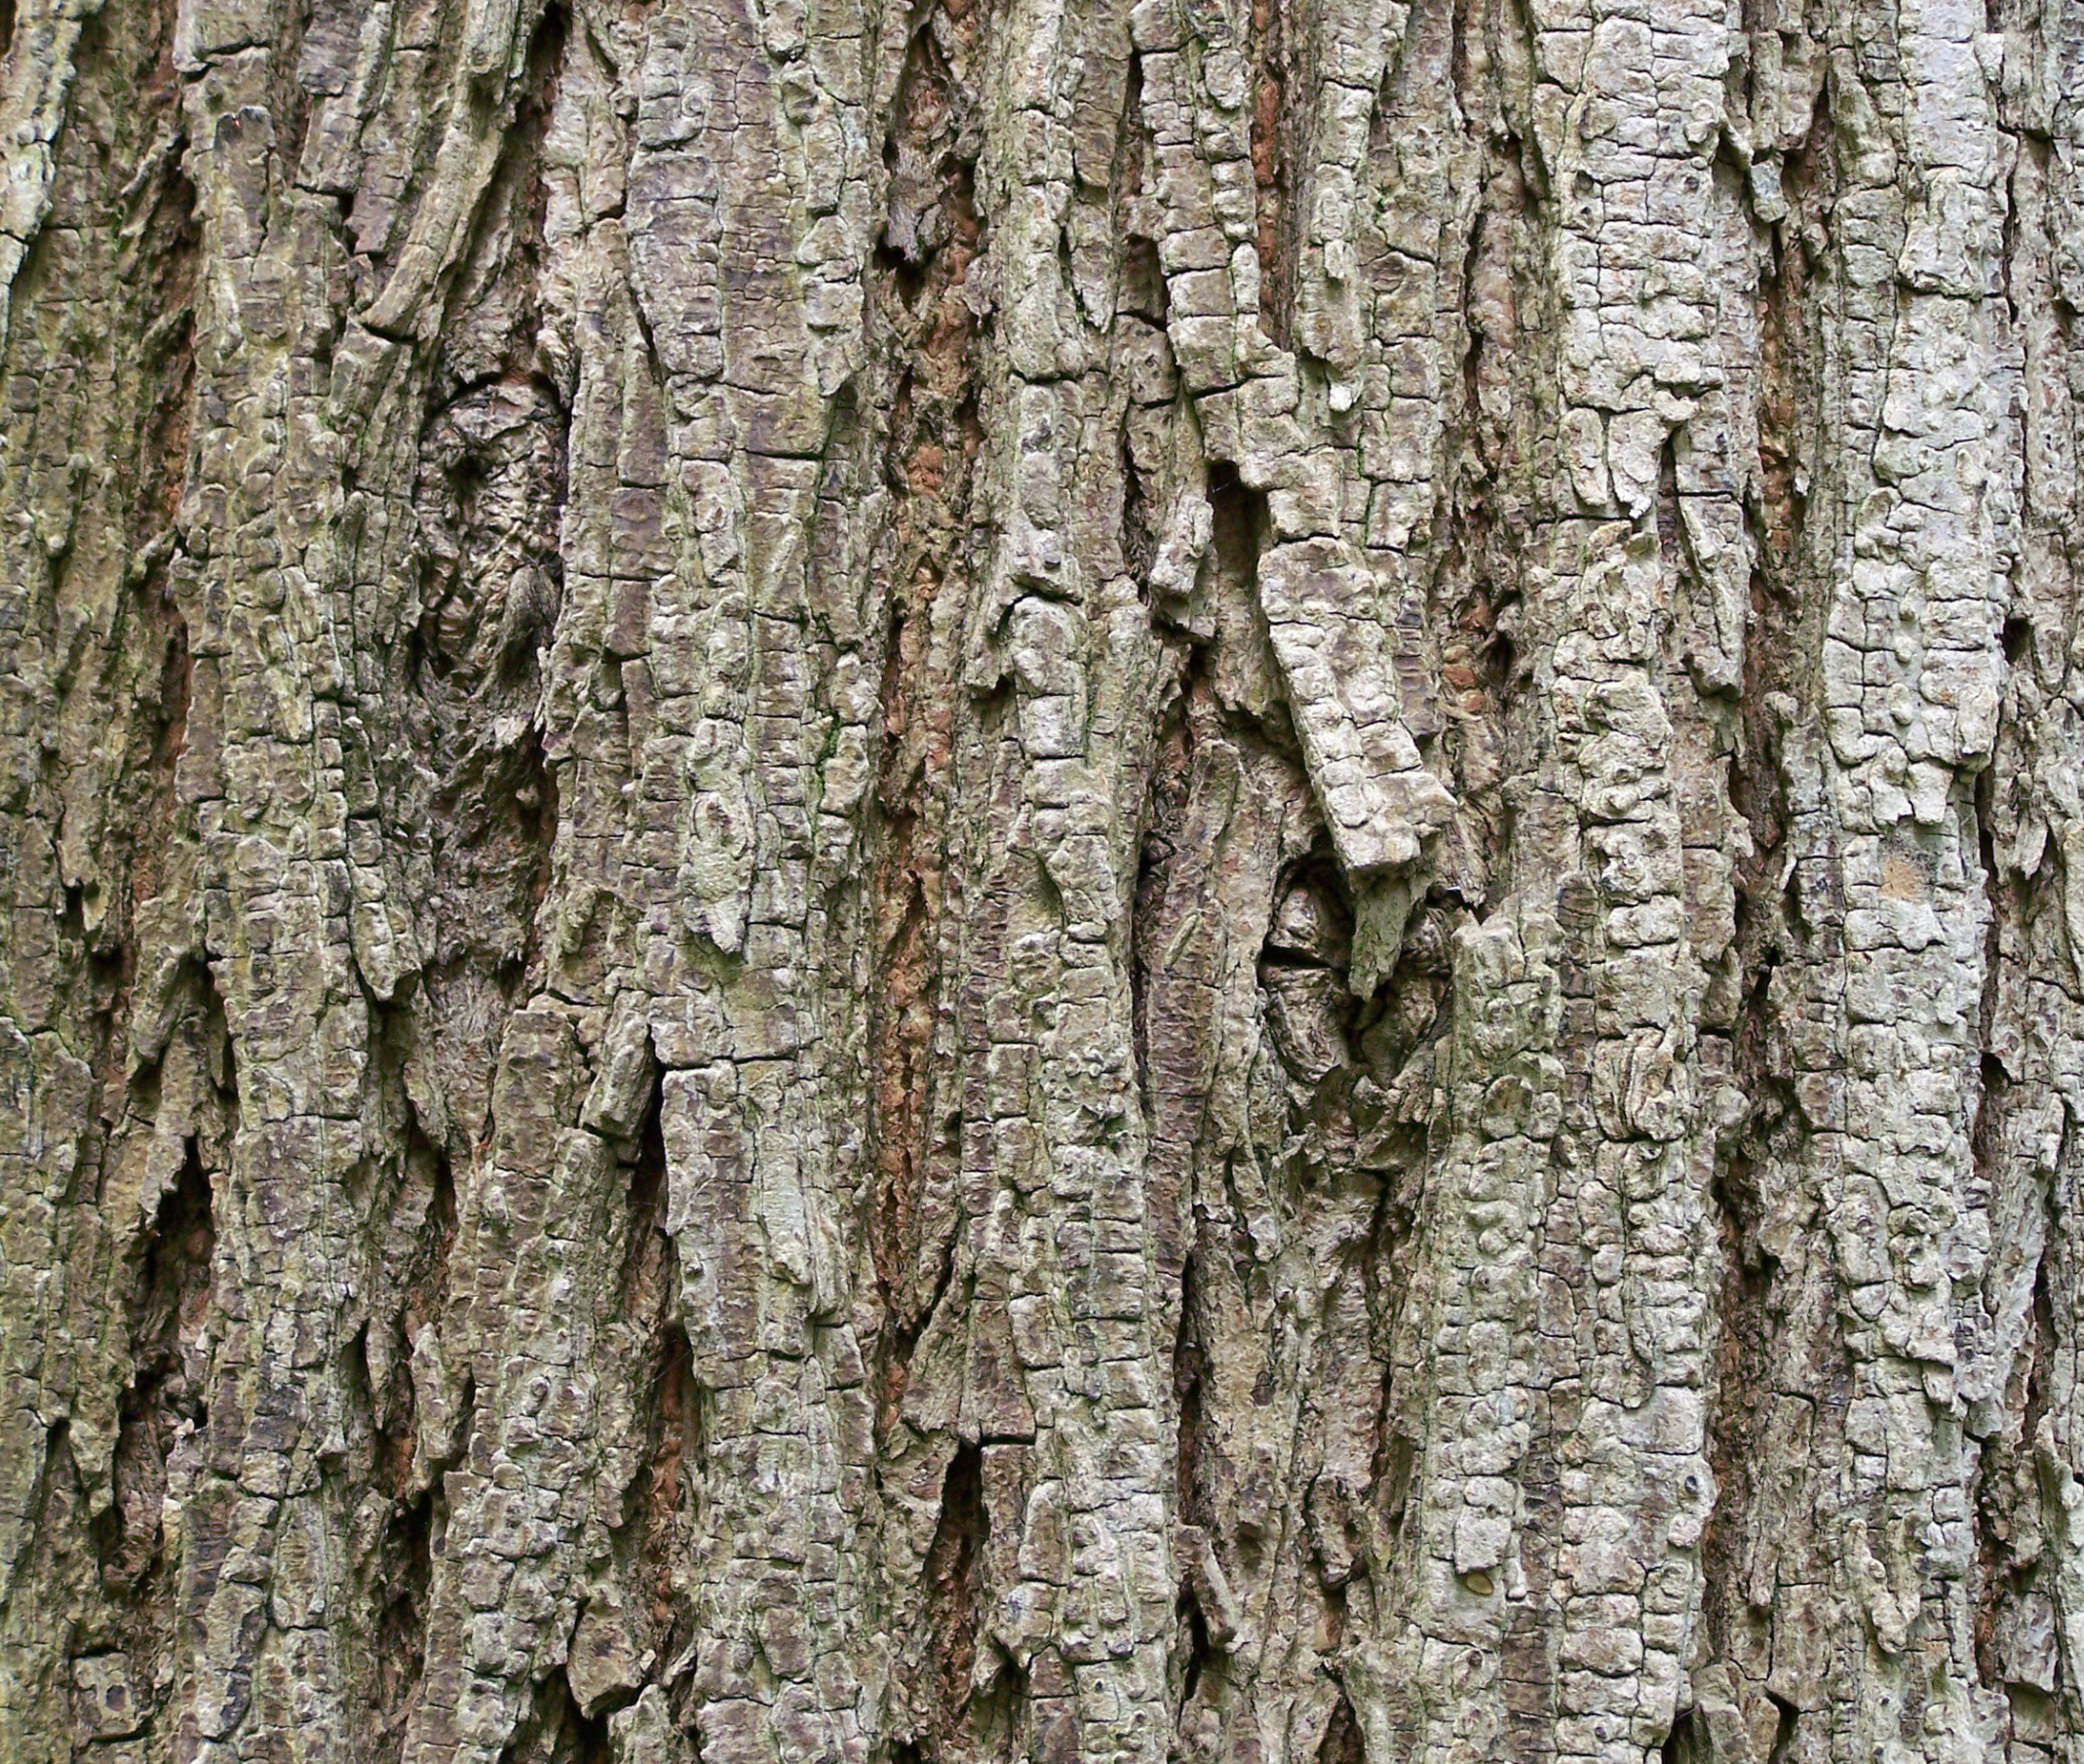 Close-up of the bark from an ash tree, morel mushroom hunting concept.